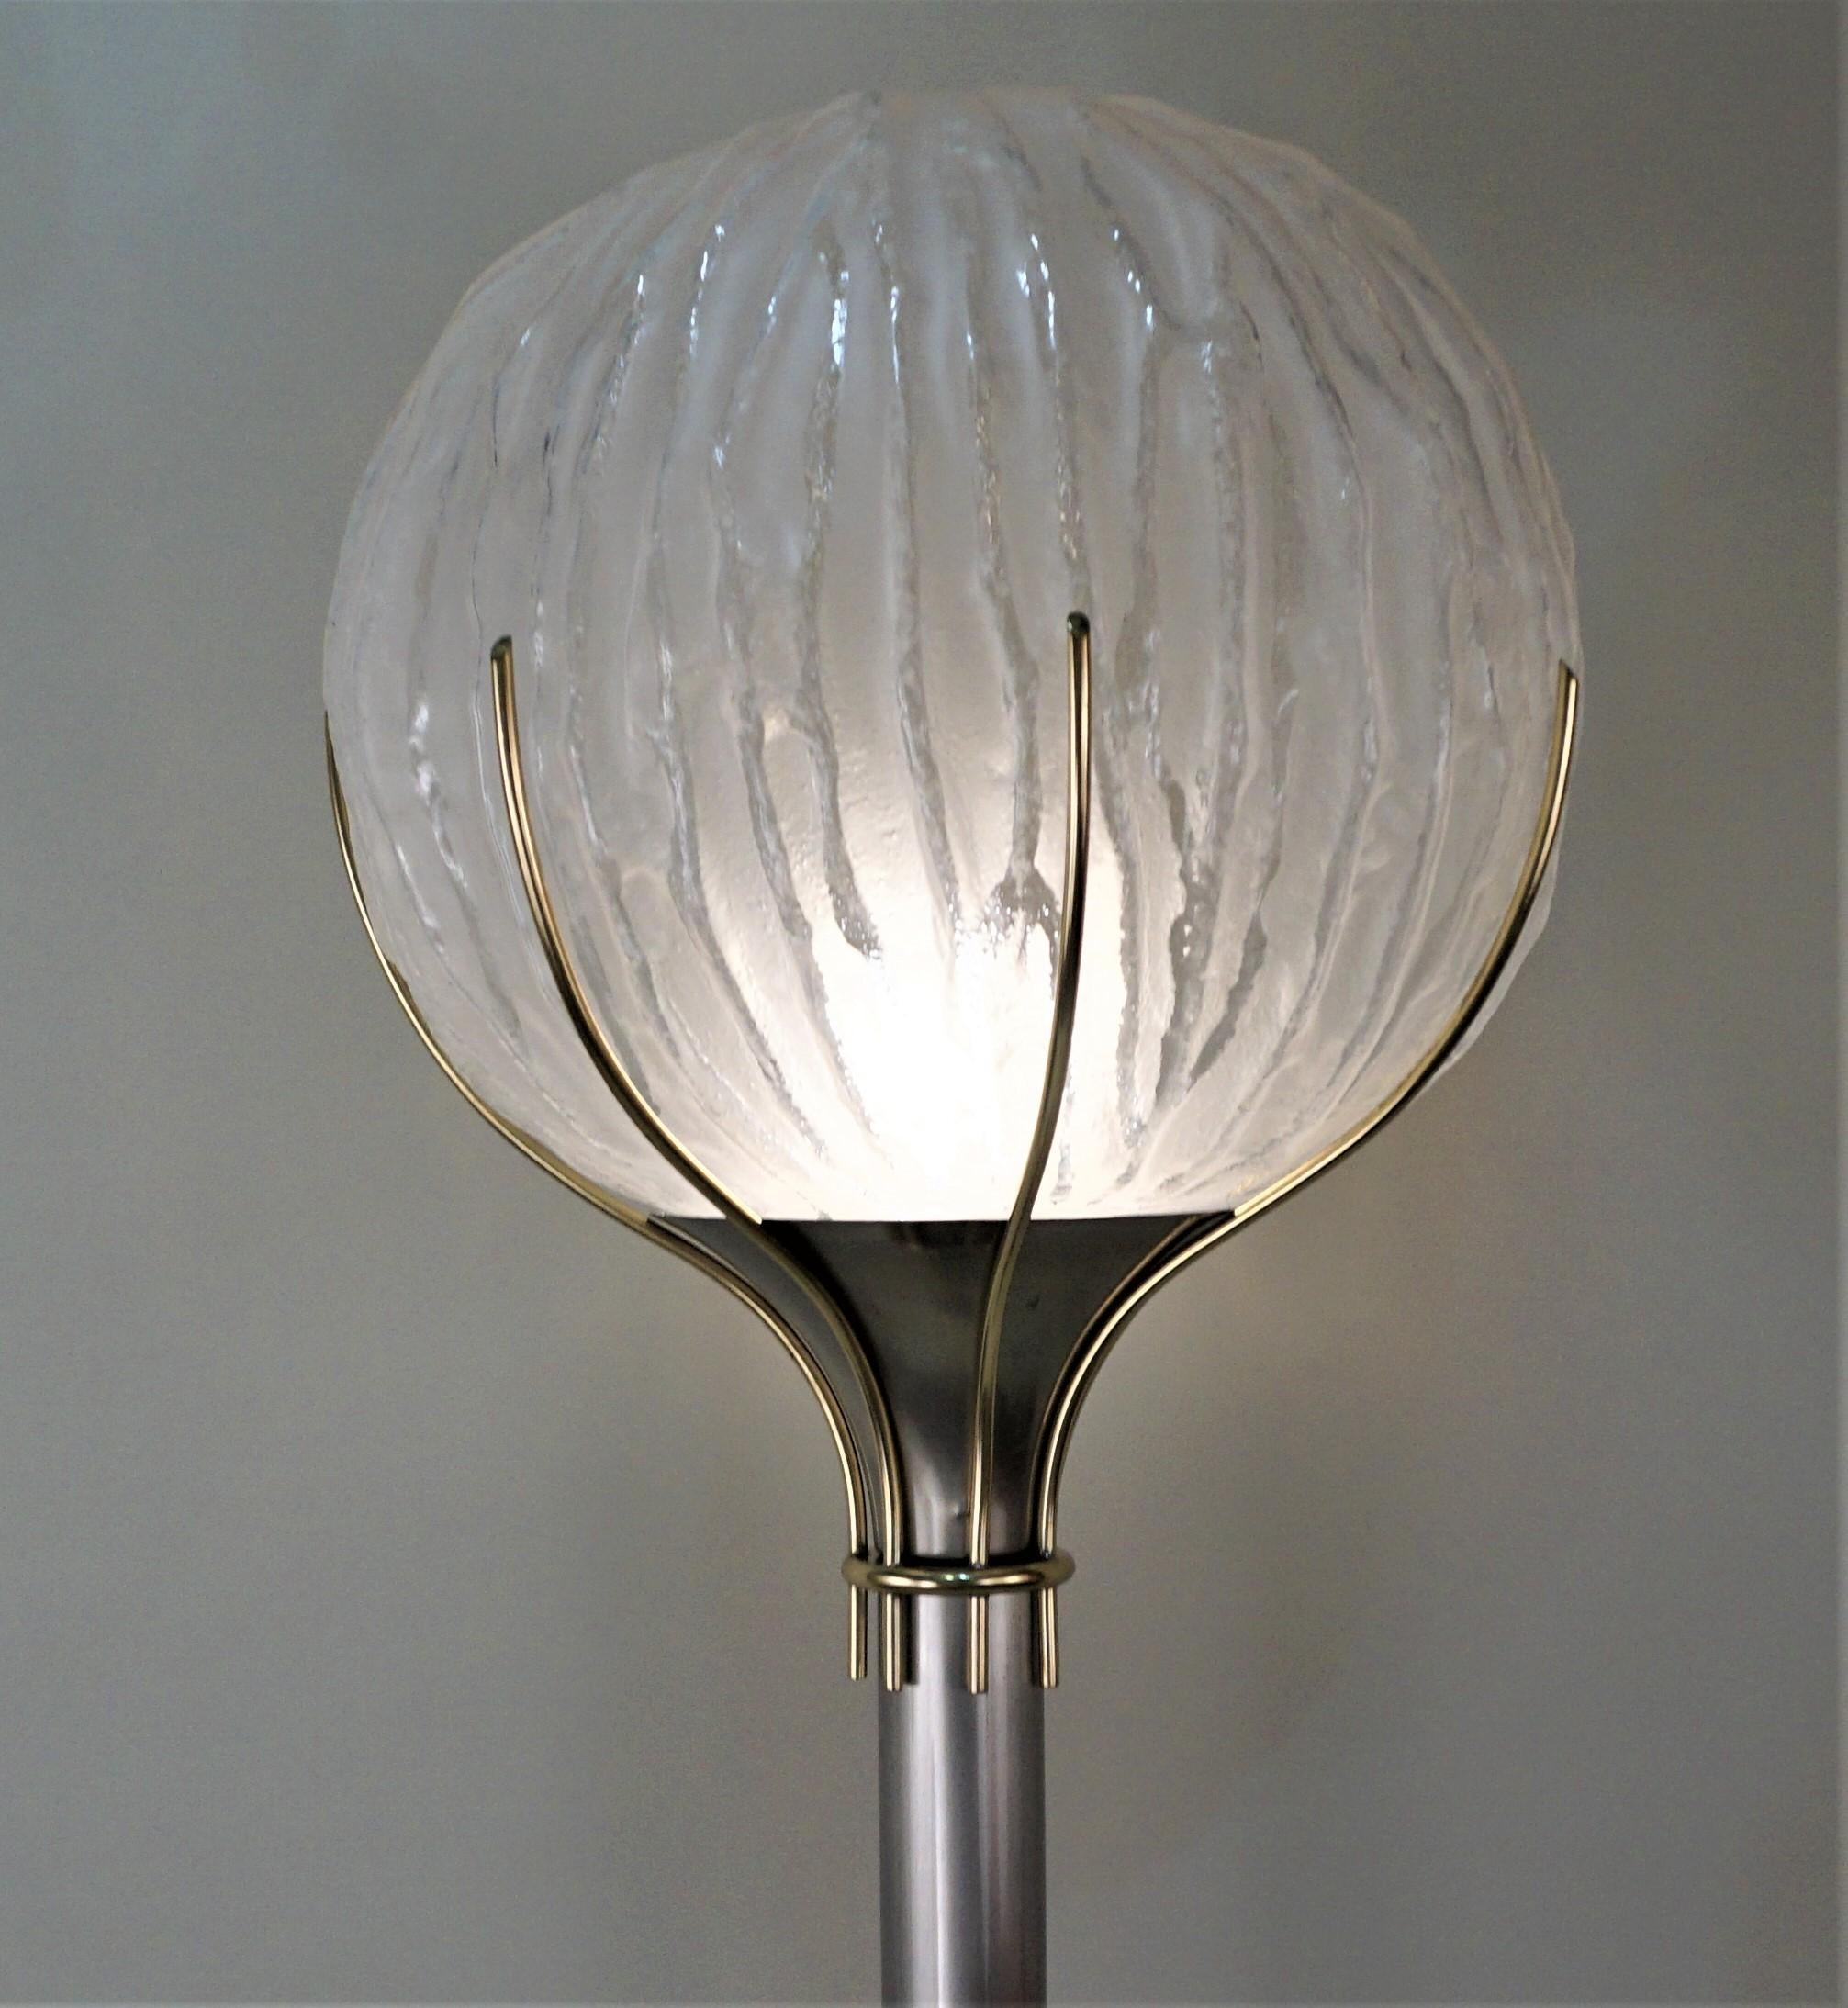 Simple but elegant, a piece sculpture that happens to be a floor lamp. Nickel plate and bronze base with textured blown glass shade.